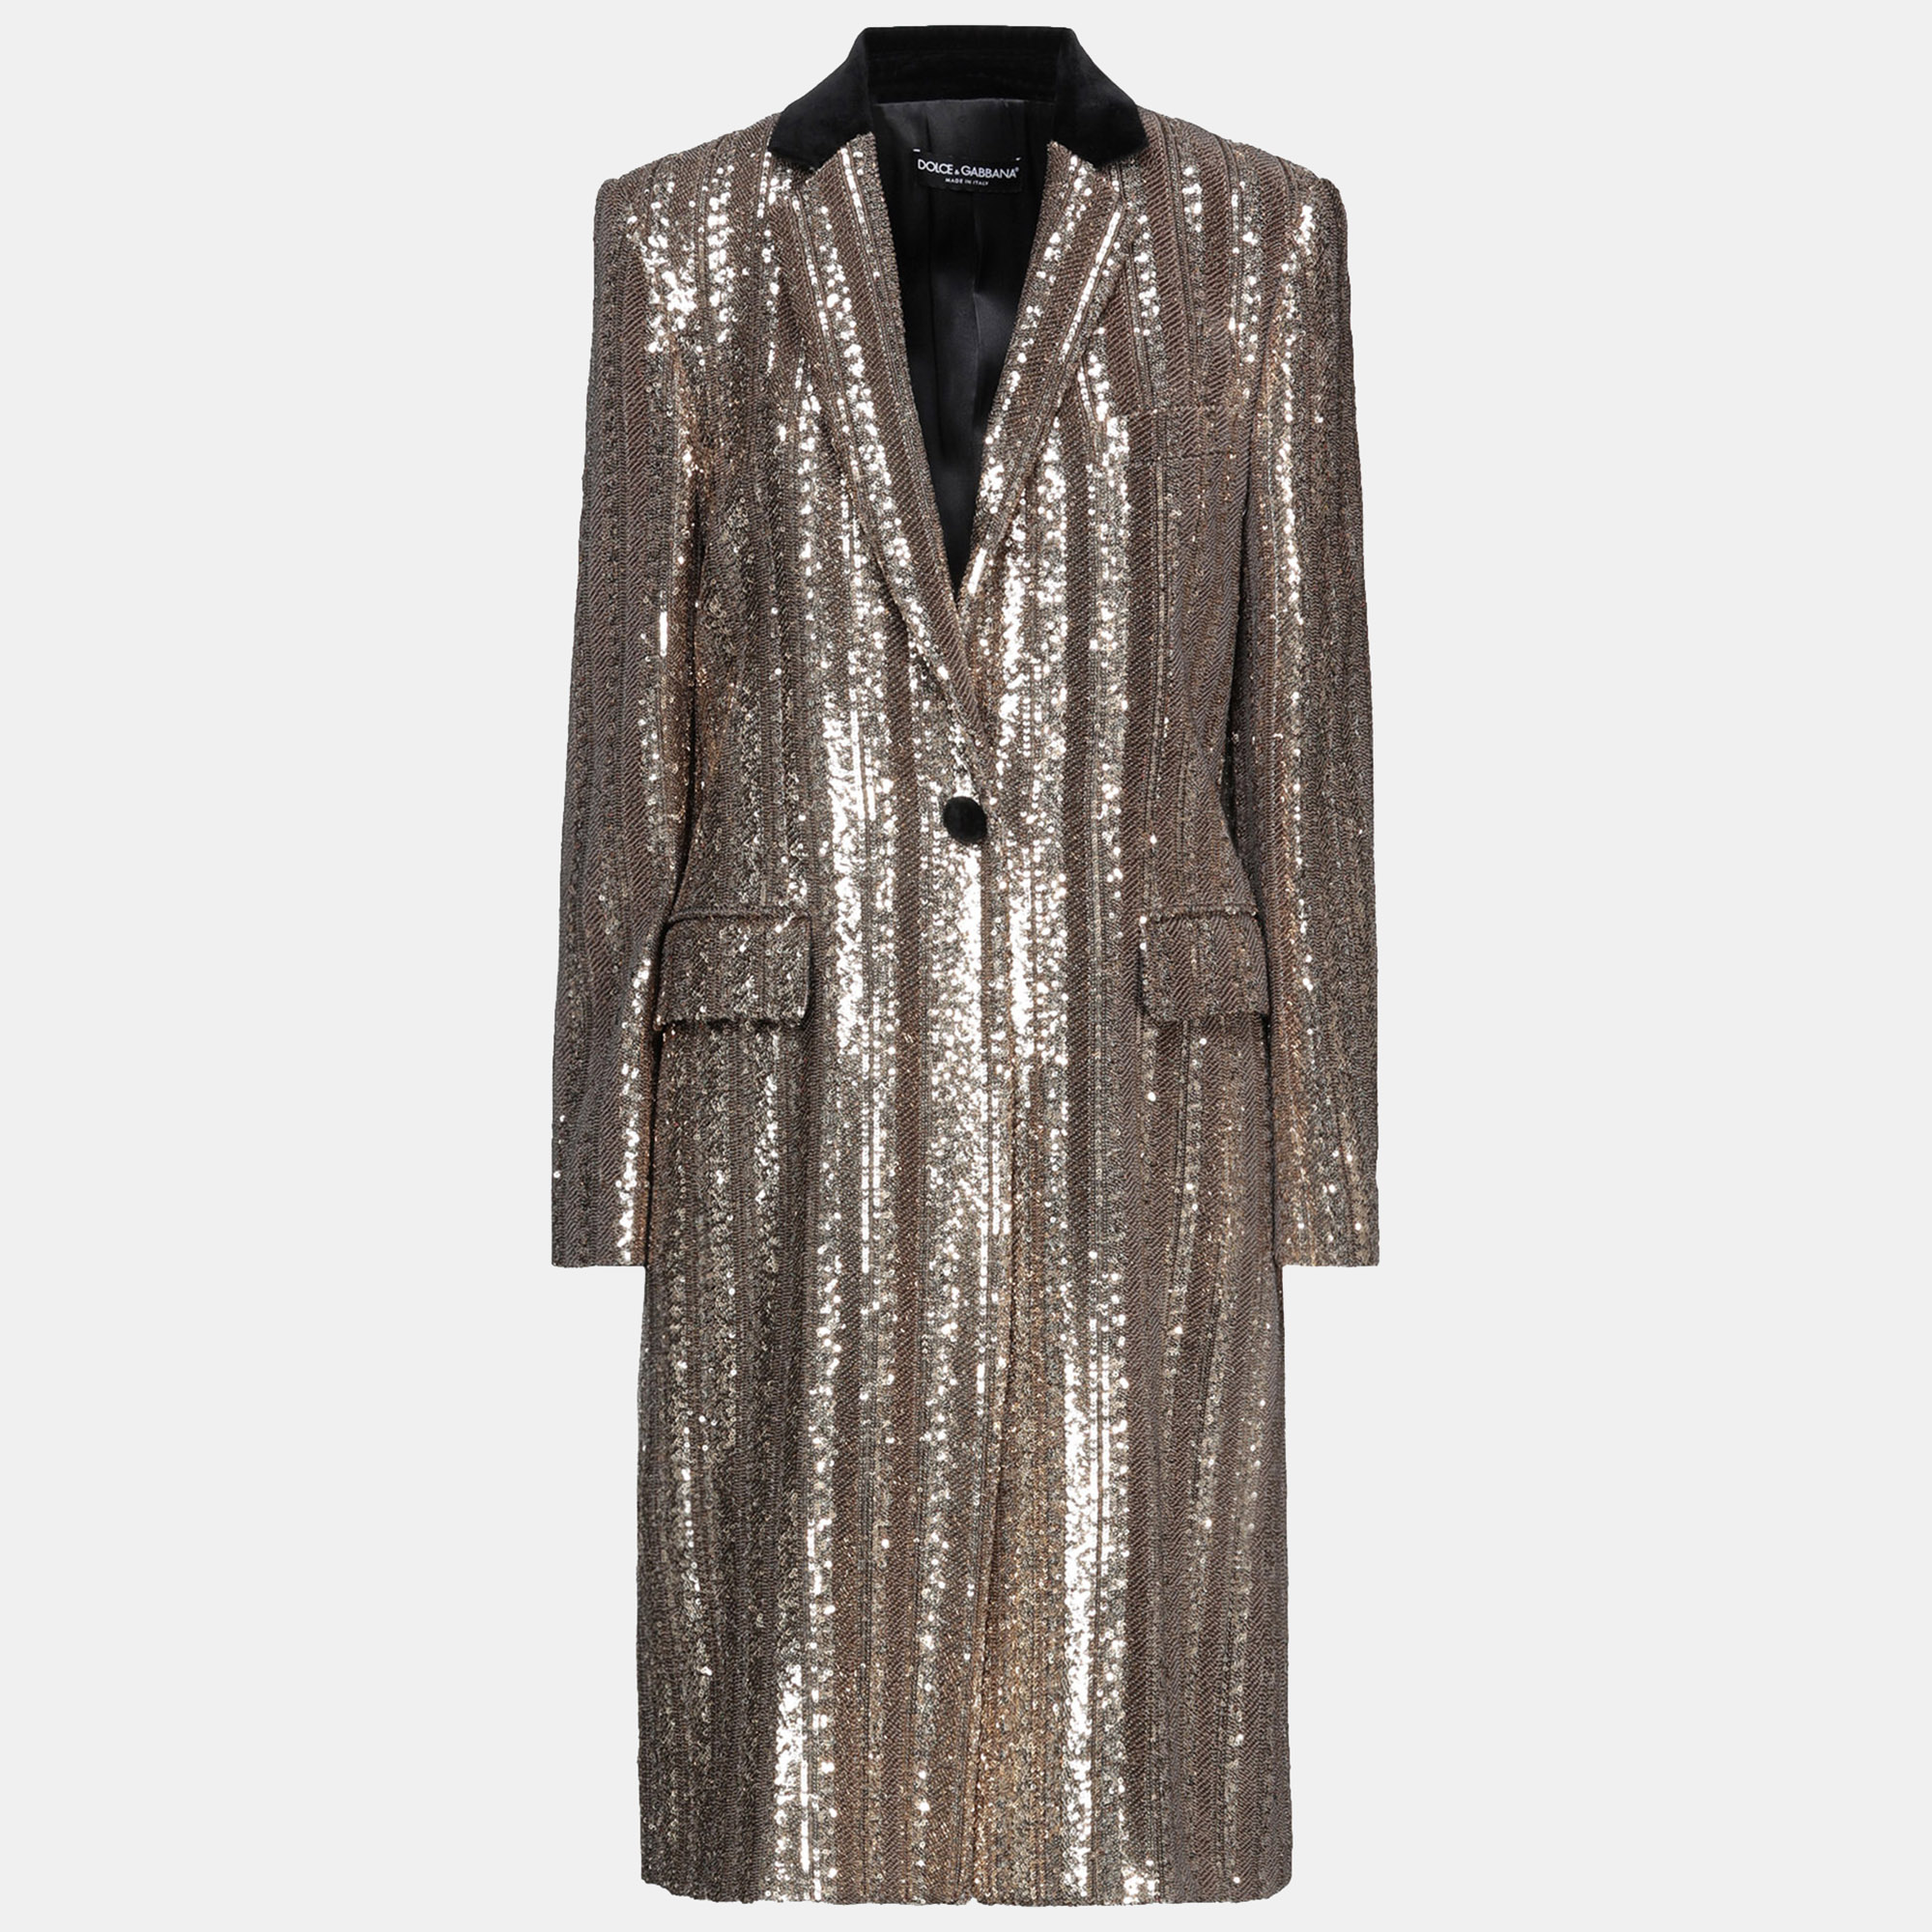 Dolce & gabbana gold sequined overcoat xs (it 38)